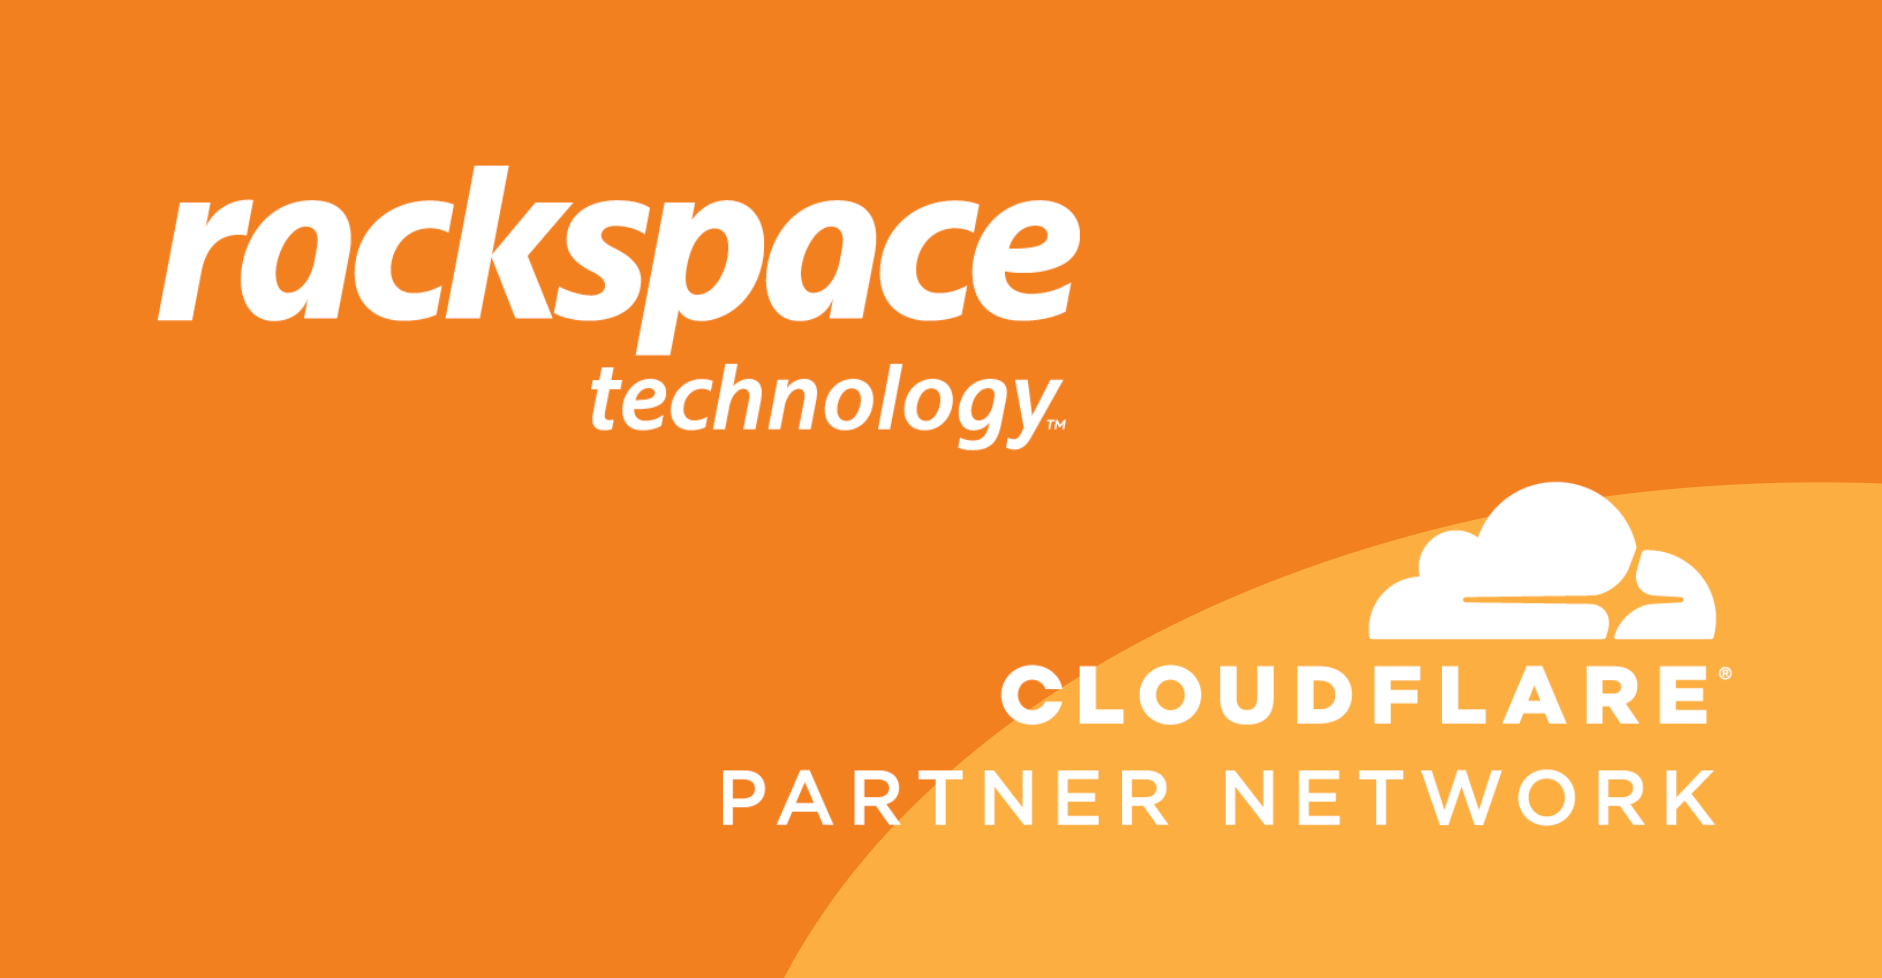 Cloudflare and Rackspace Technology Expand Partnership with Managed Services